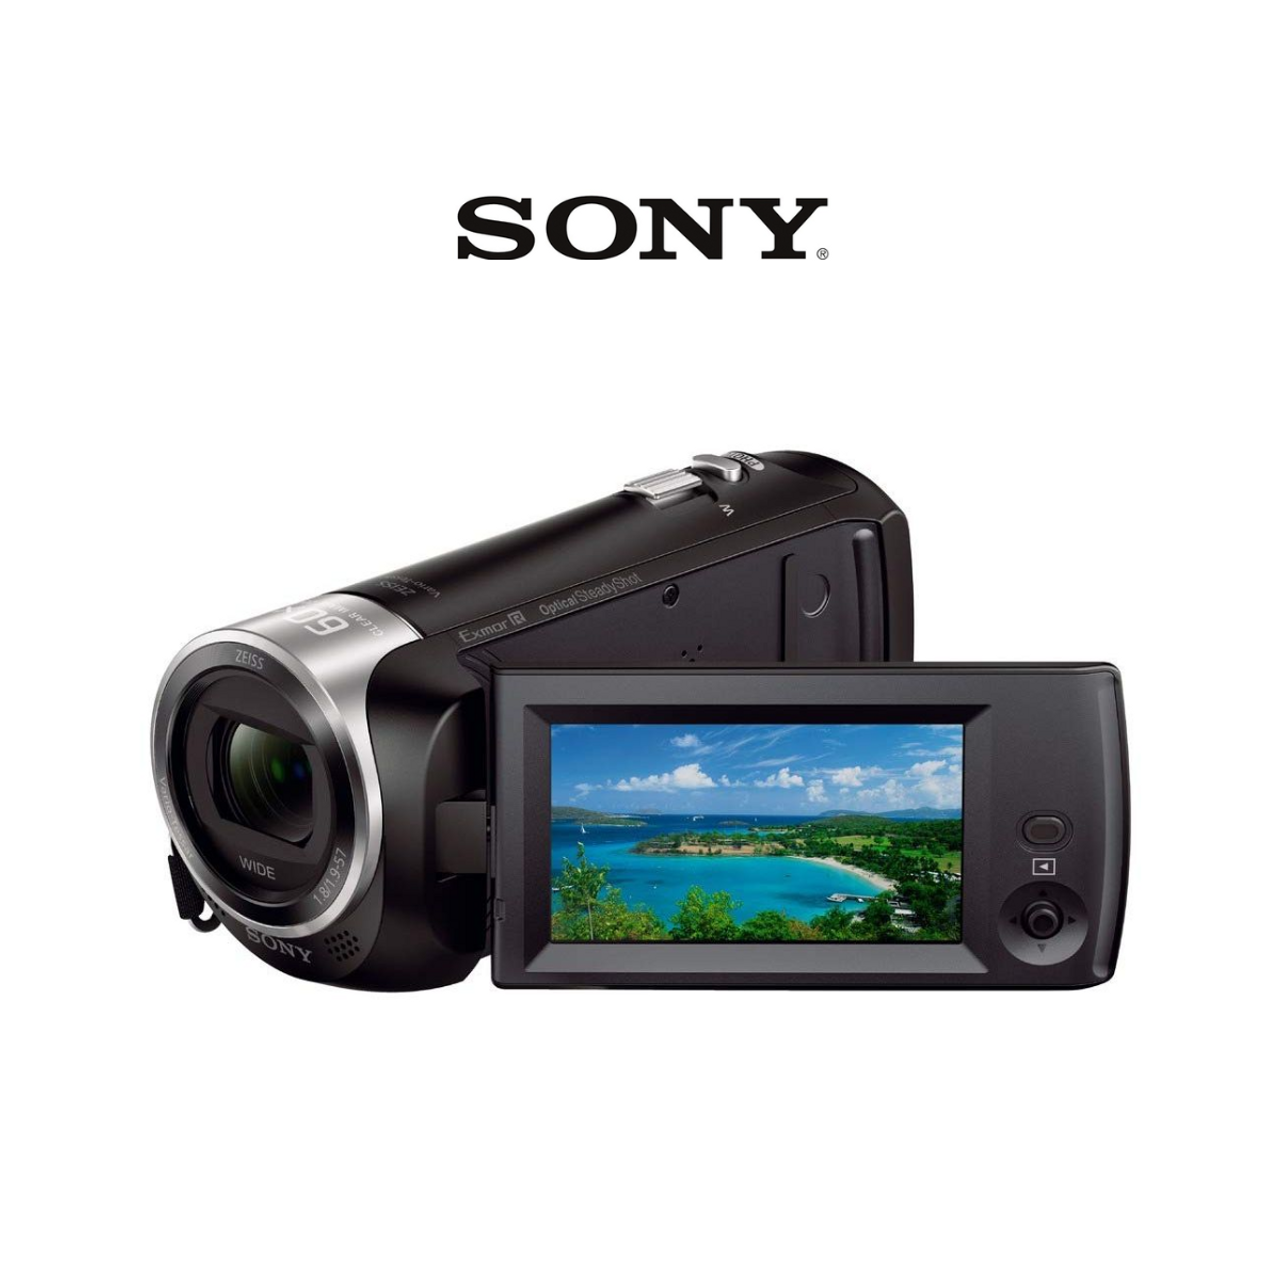 Sony HD Video Recording Handycam Camcorder product image